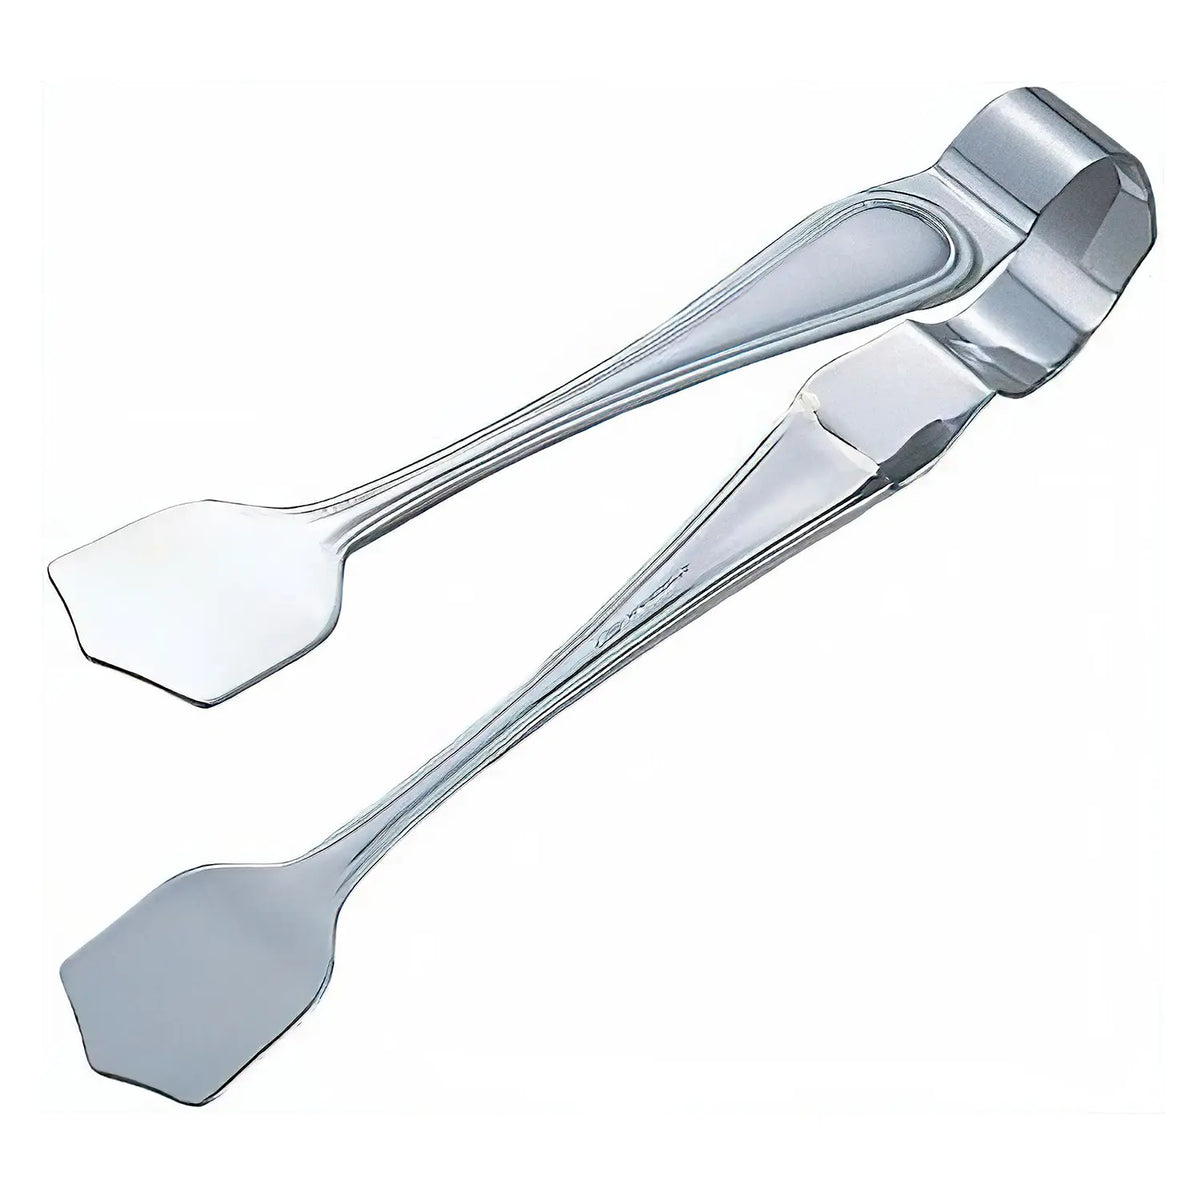 EBM Cecilia Stainless Steel Pastry Tongs